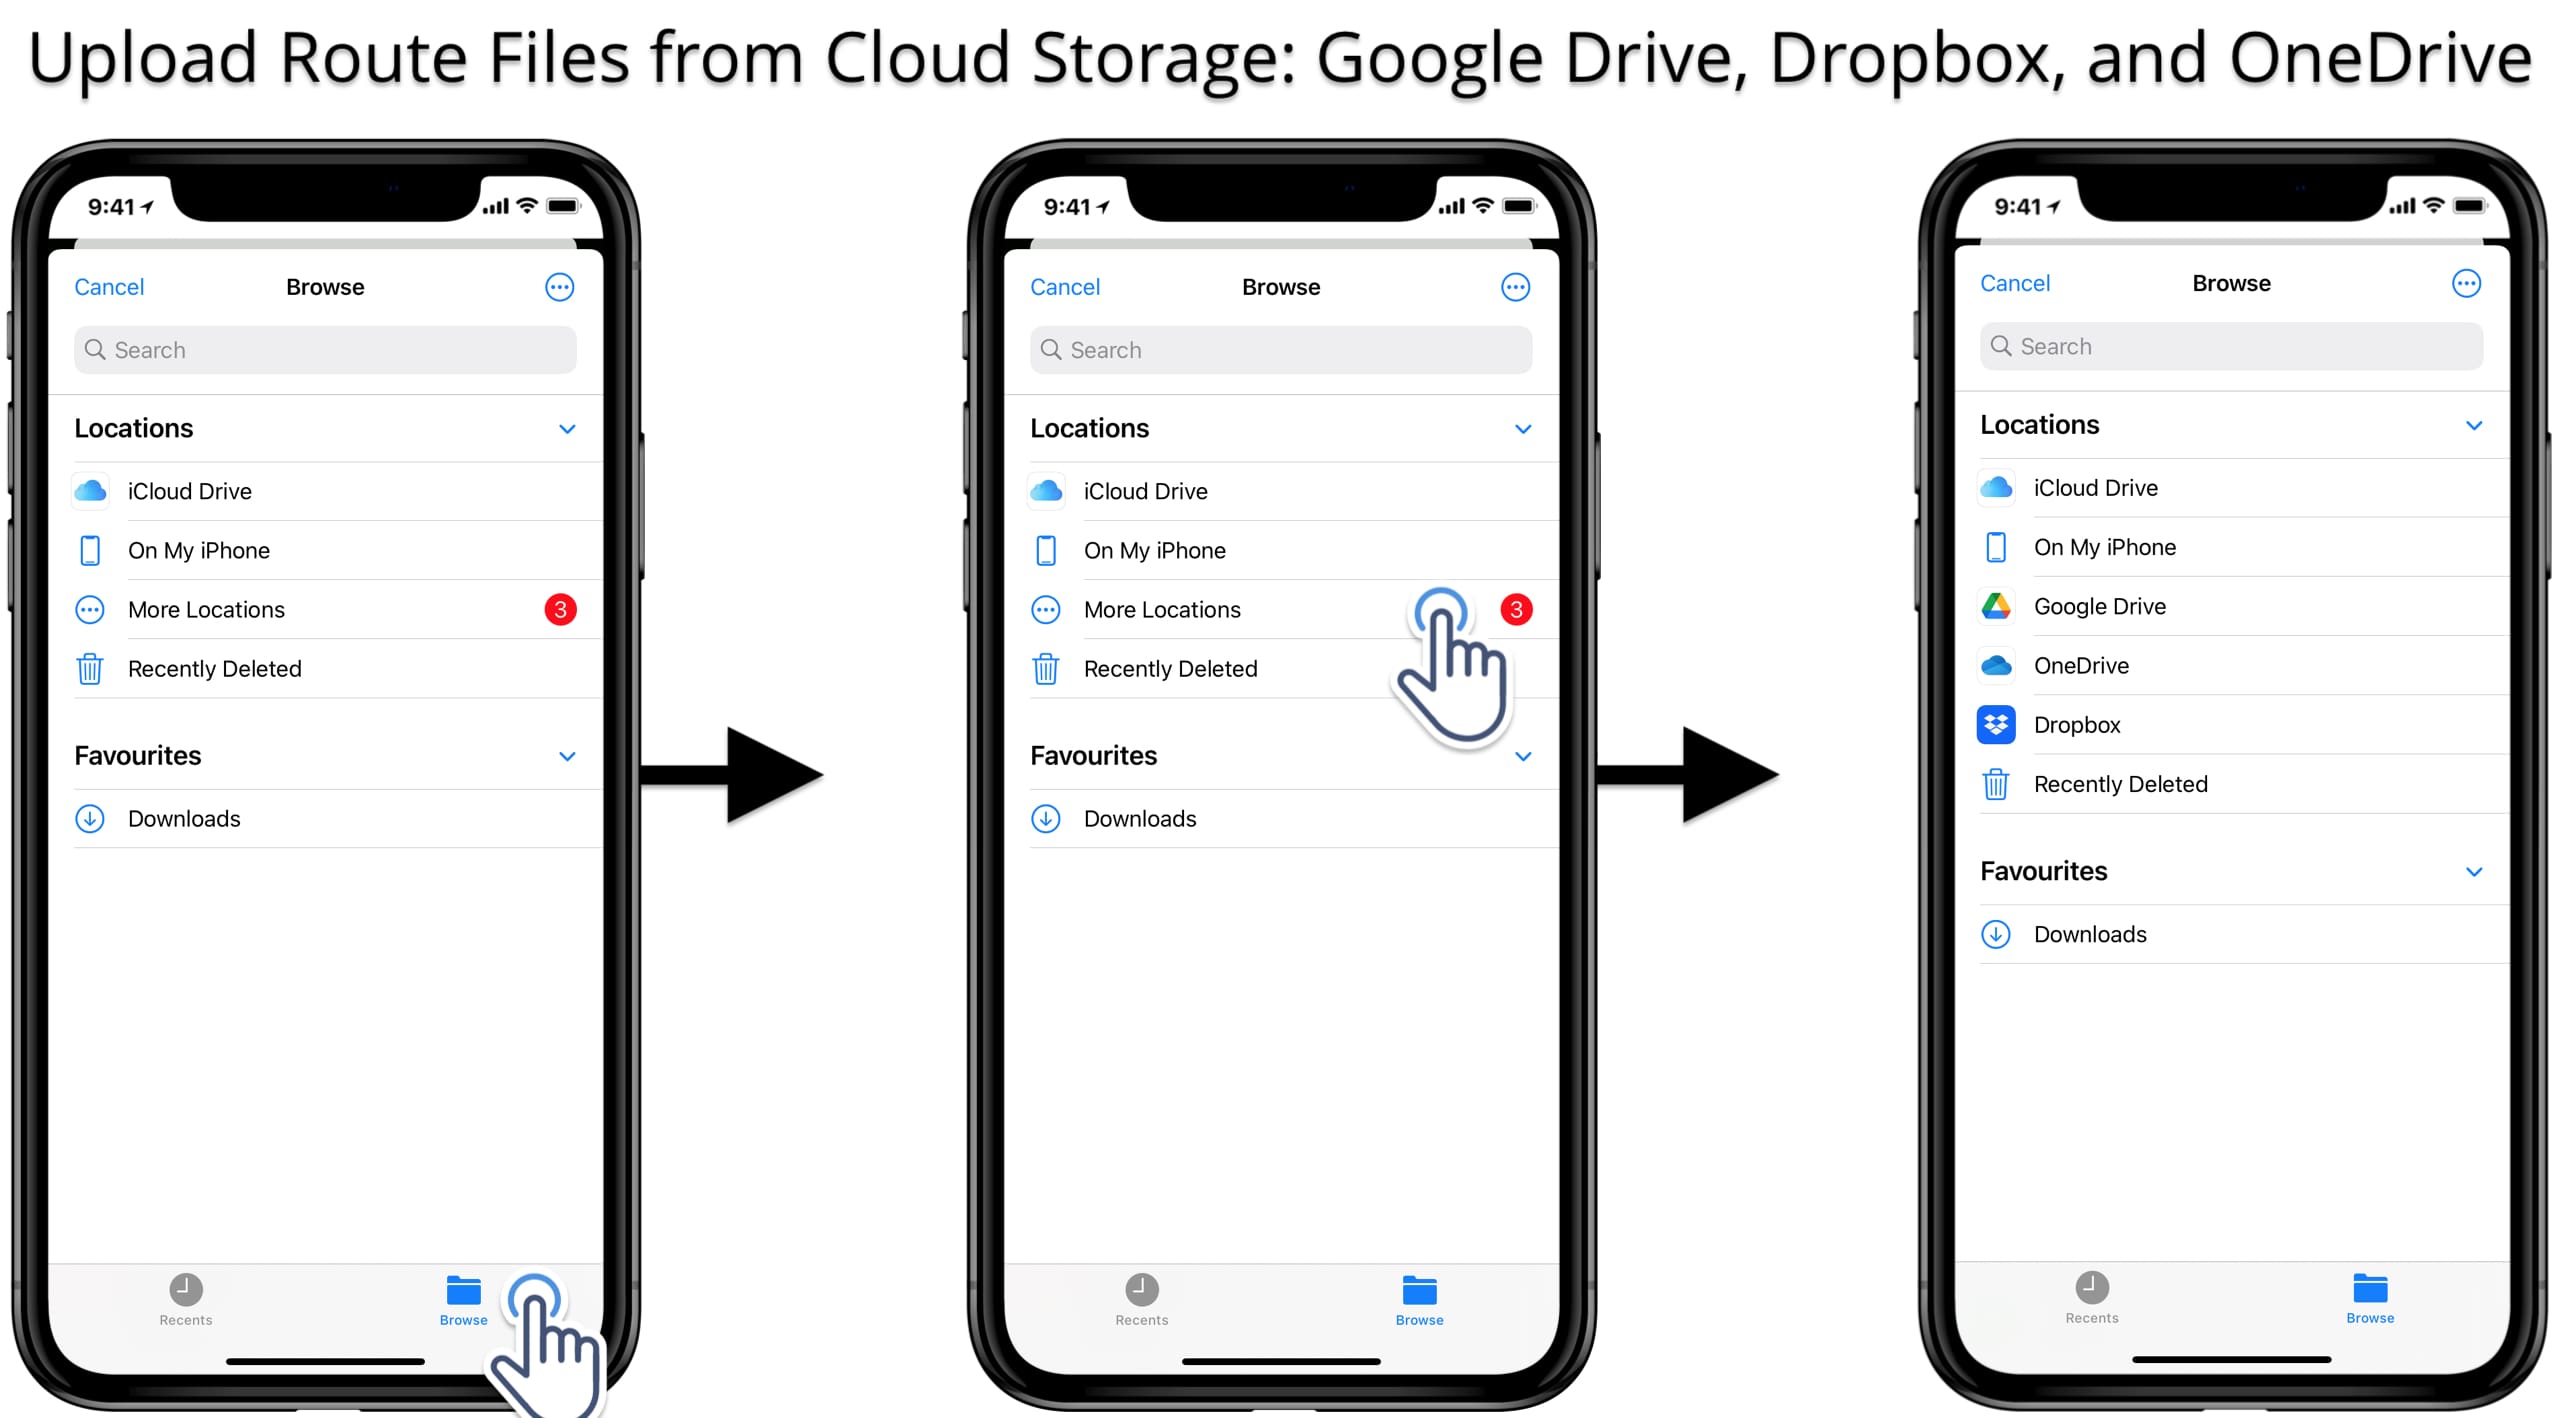 Upload route addresses into route planner from cloud storage like Google Drive, Dropbox, OneDrive.